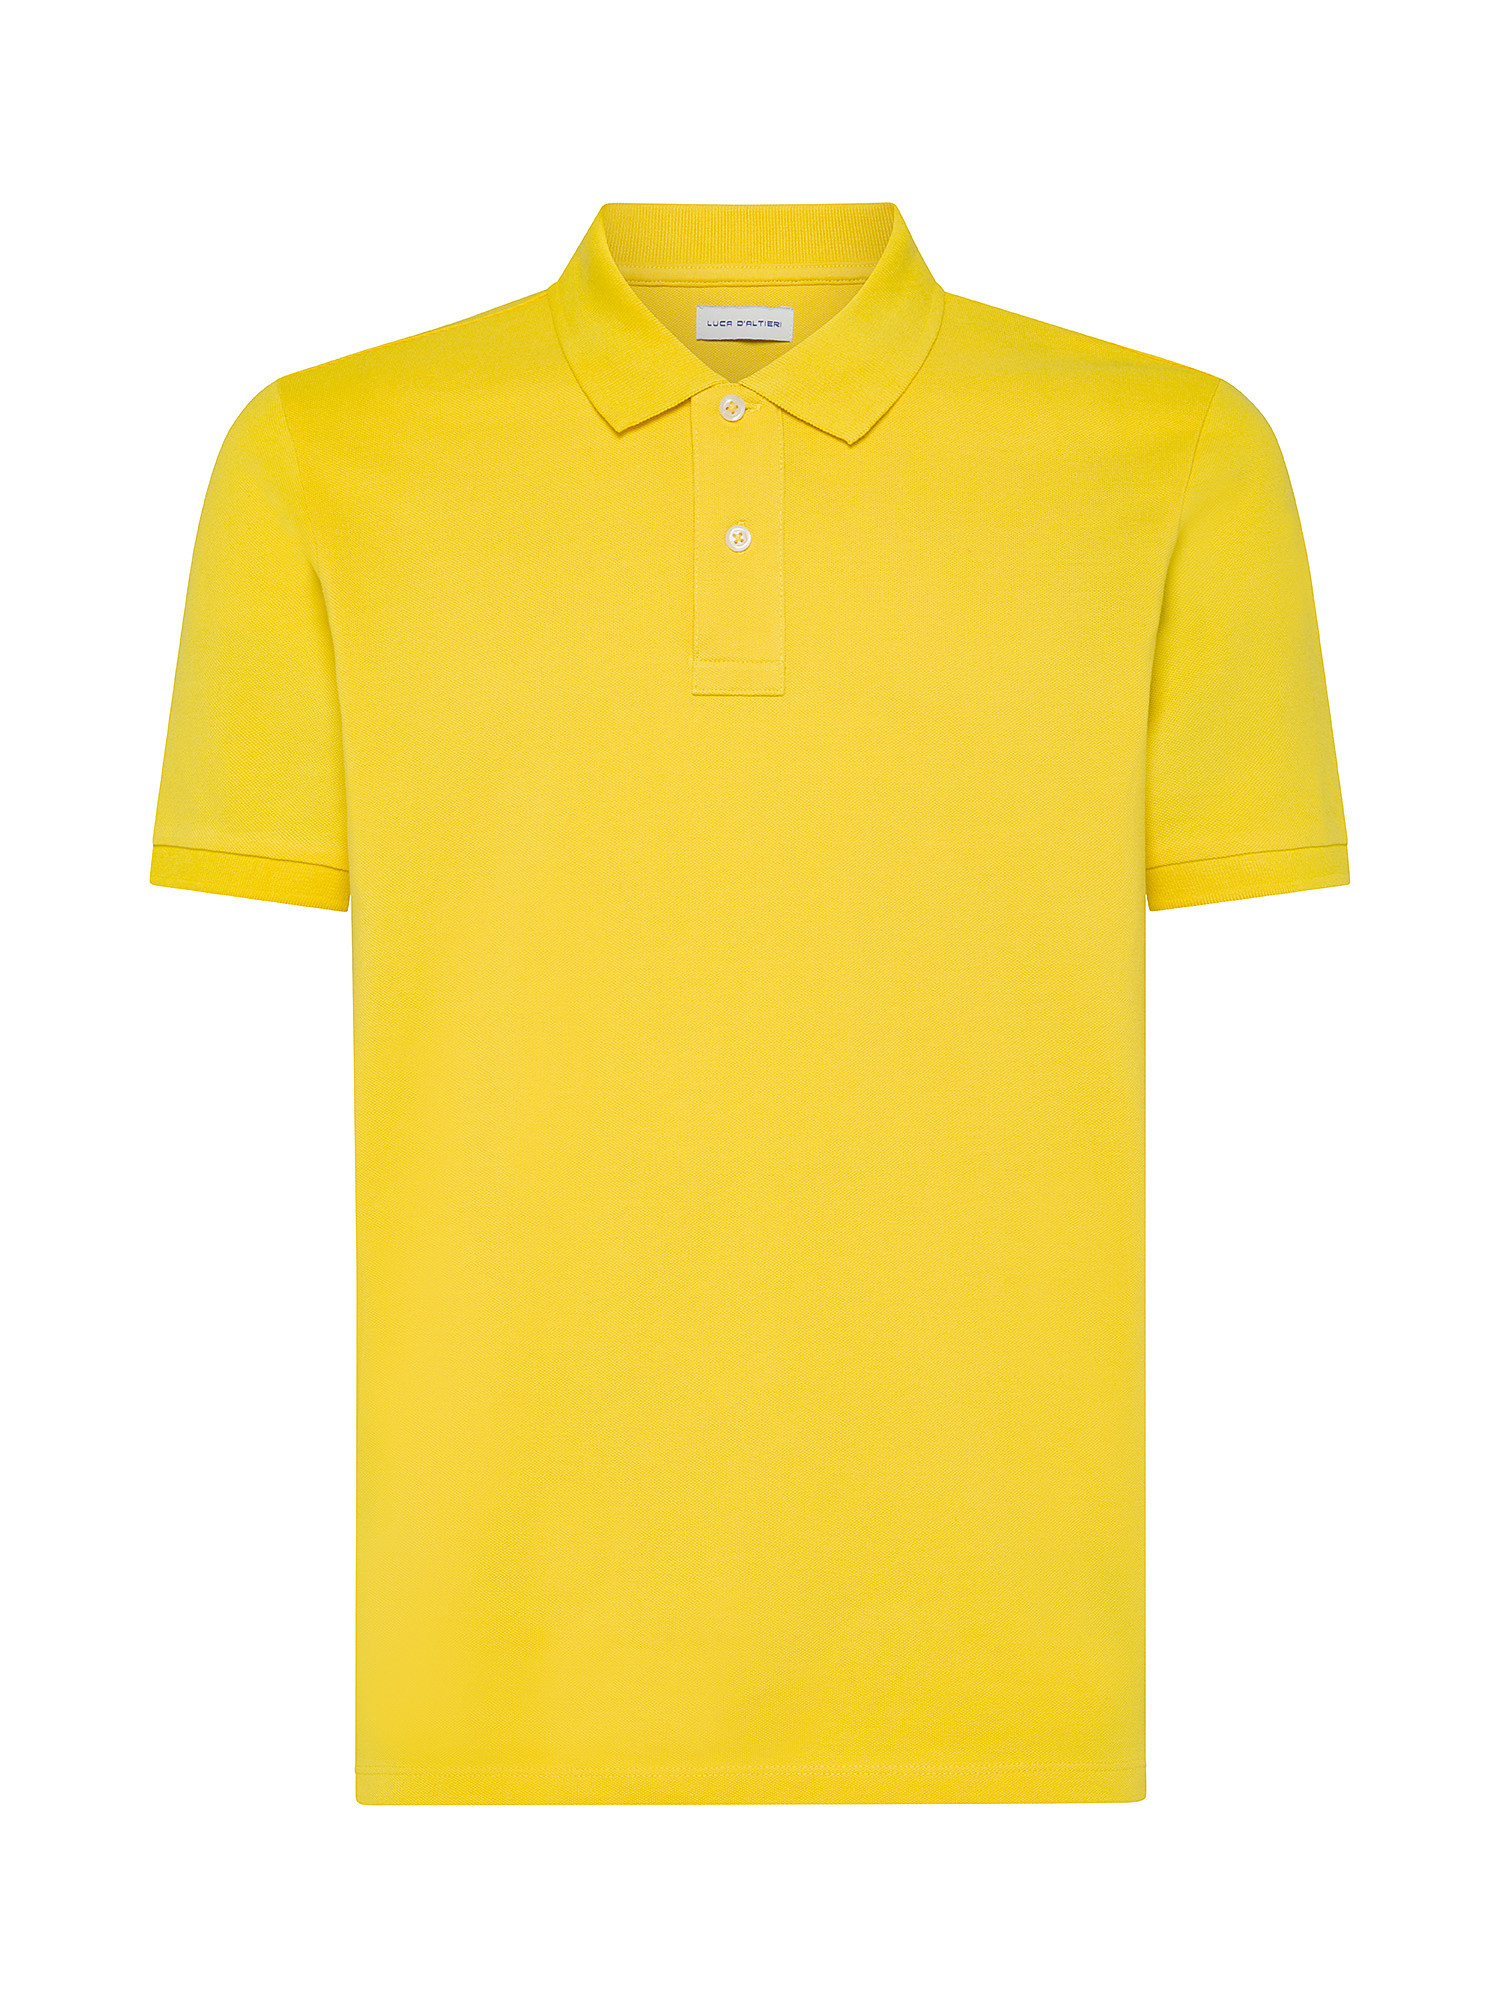 Luca D'Altieri - Polo in pure cotton, Yellow, large image number 0